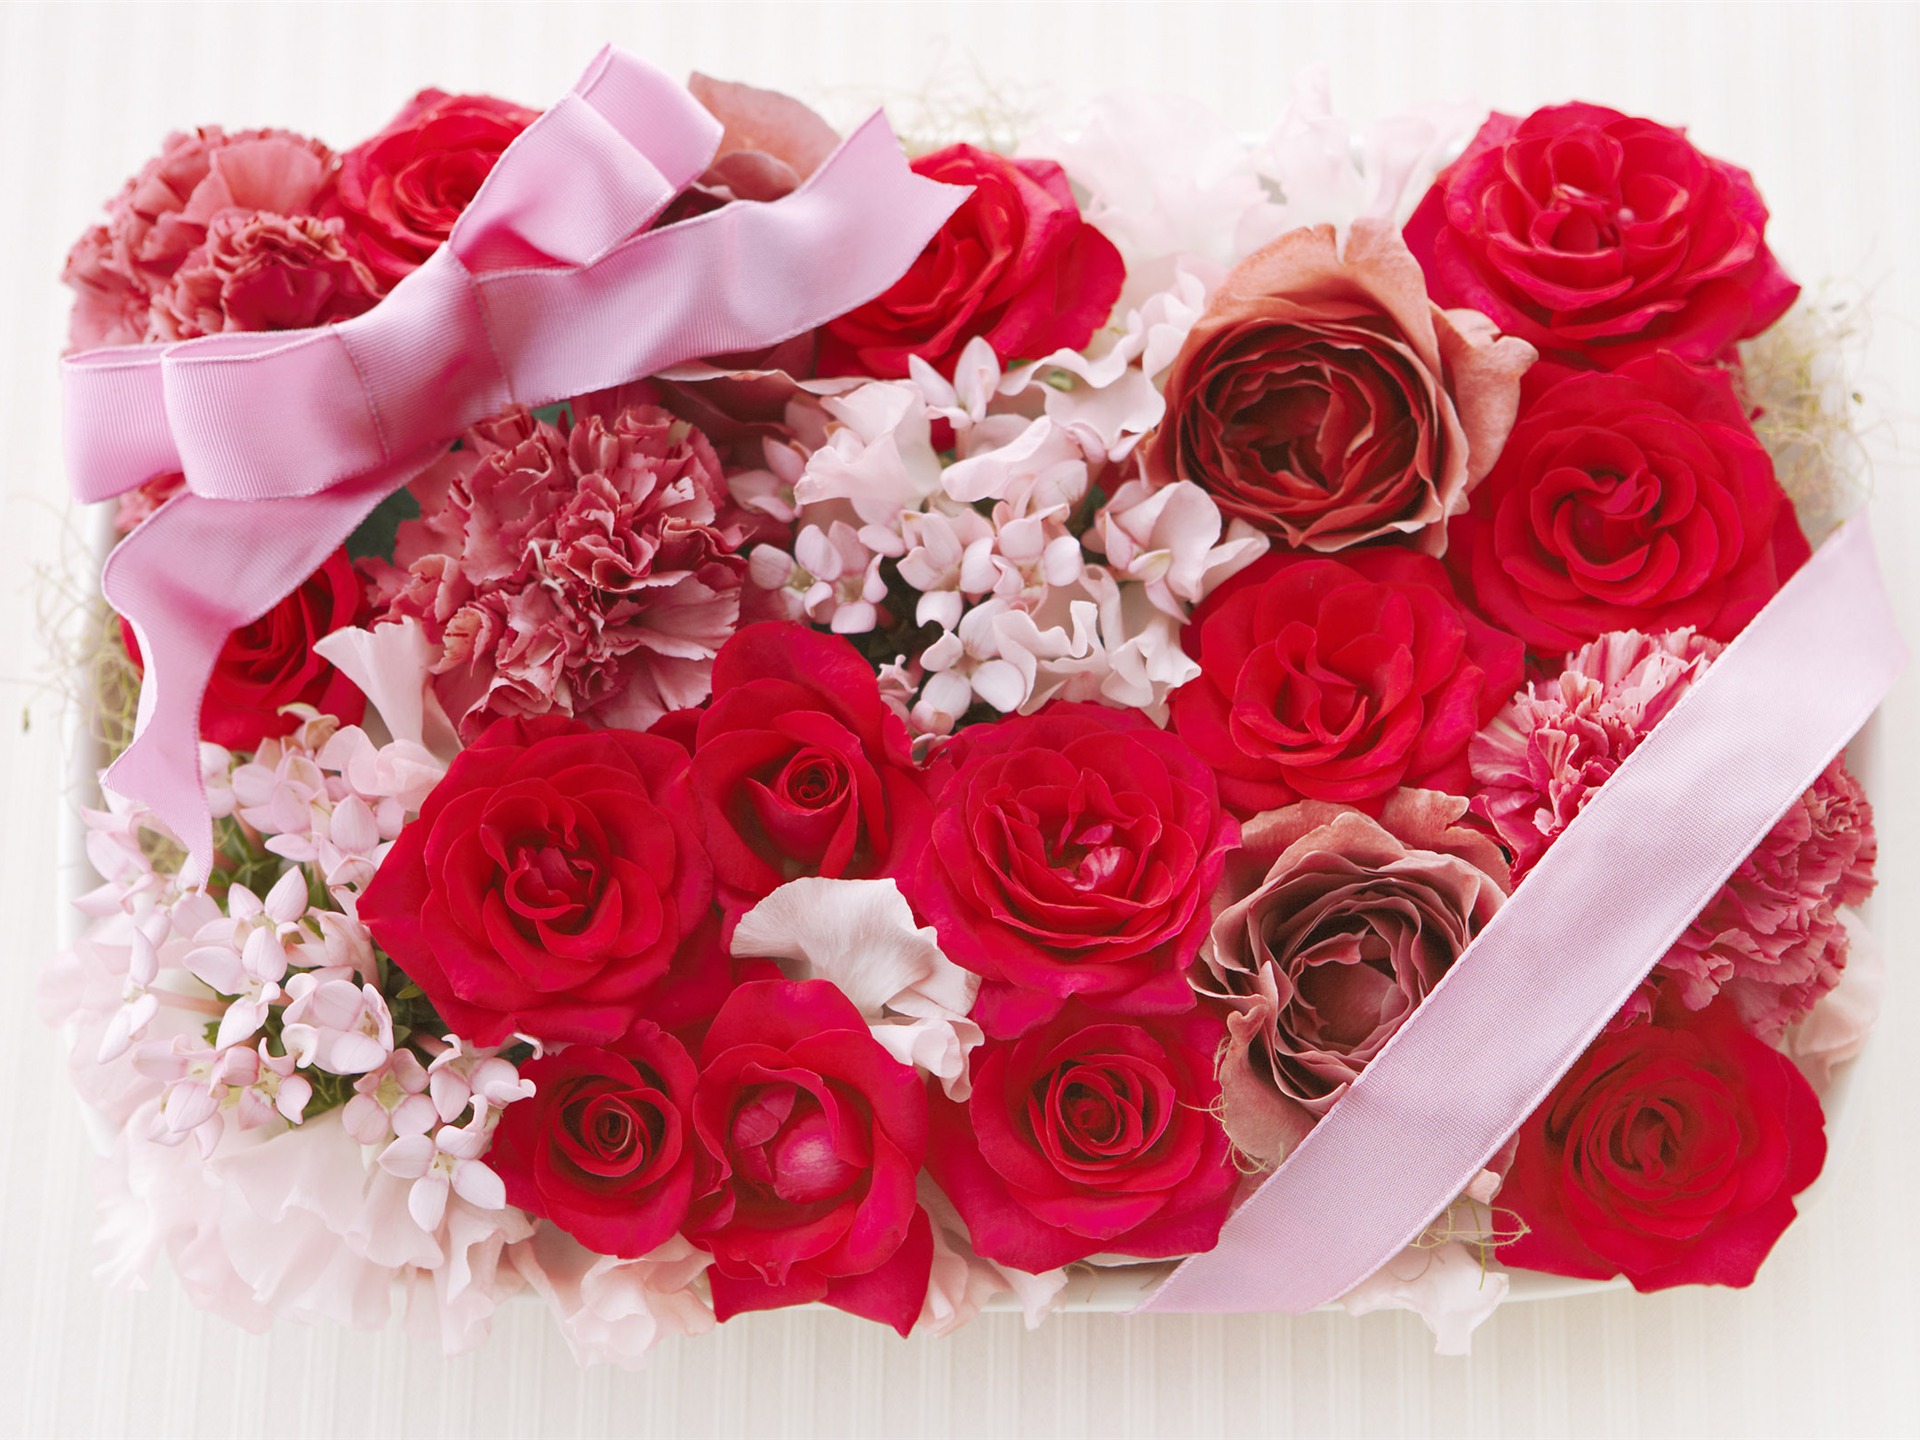 Flowers Gifts HD Wallpapers (1) #18 - 1920x1440